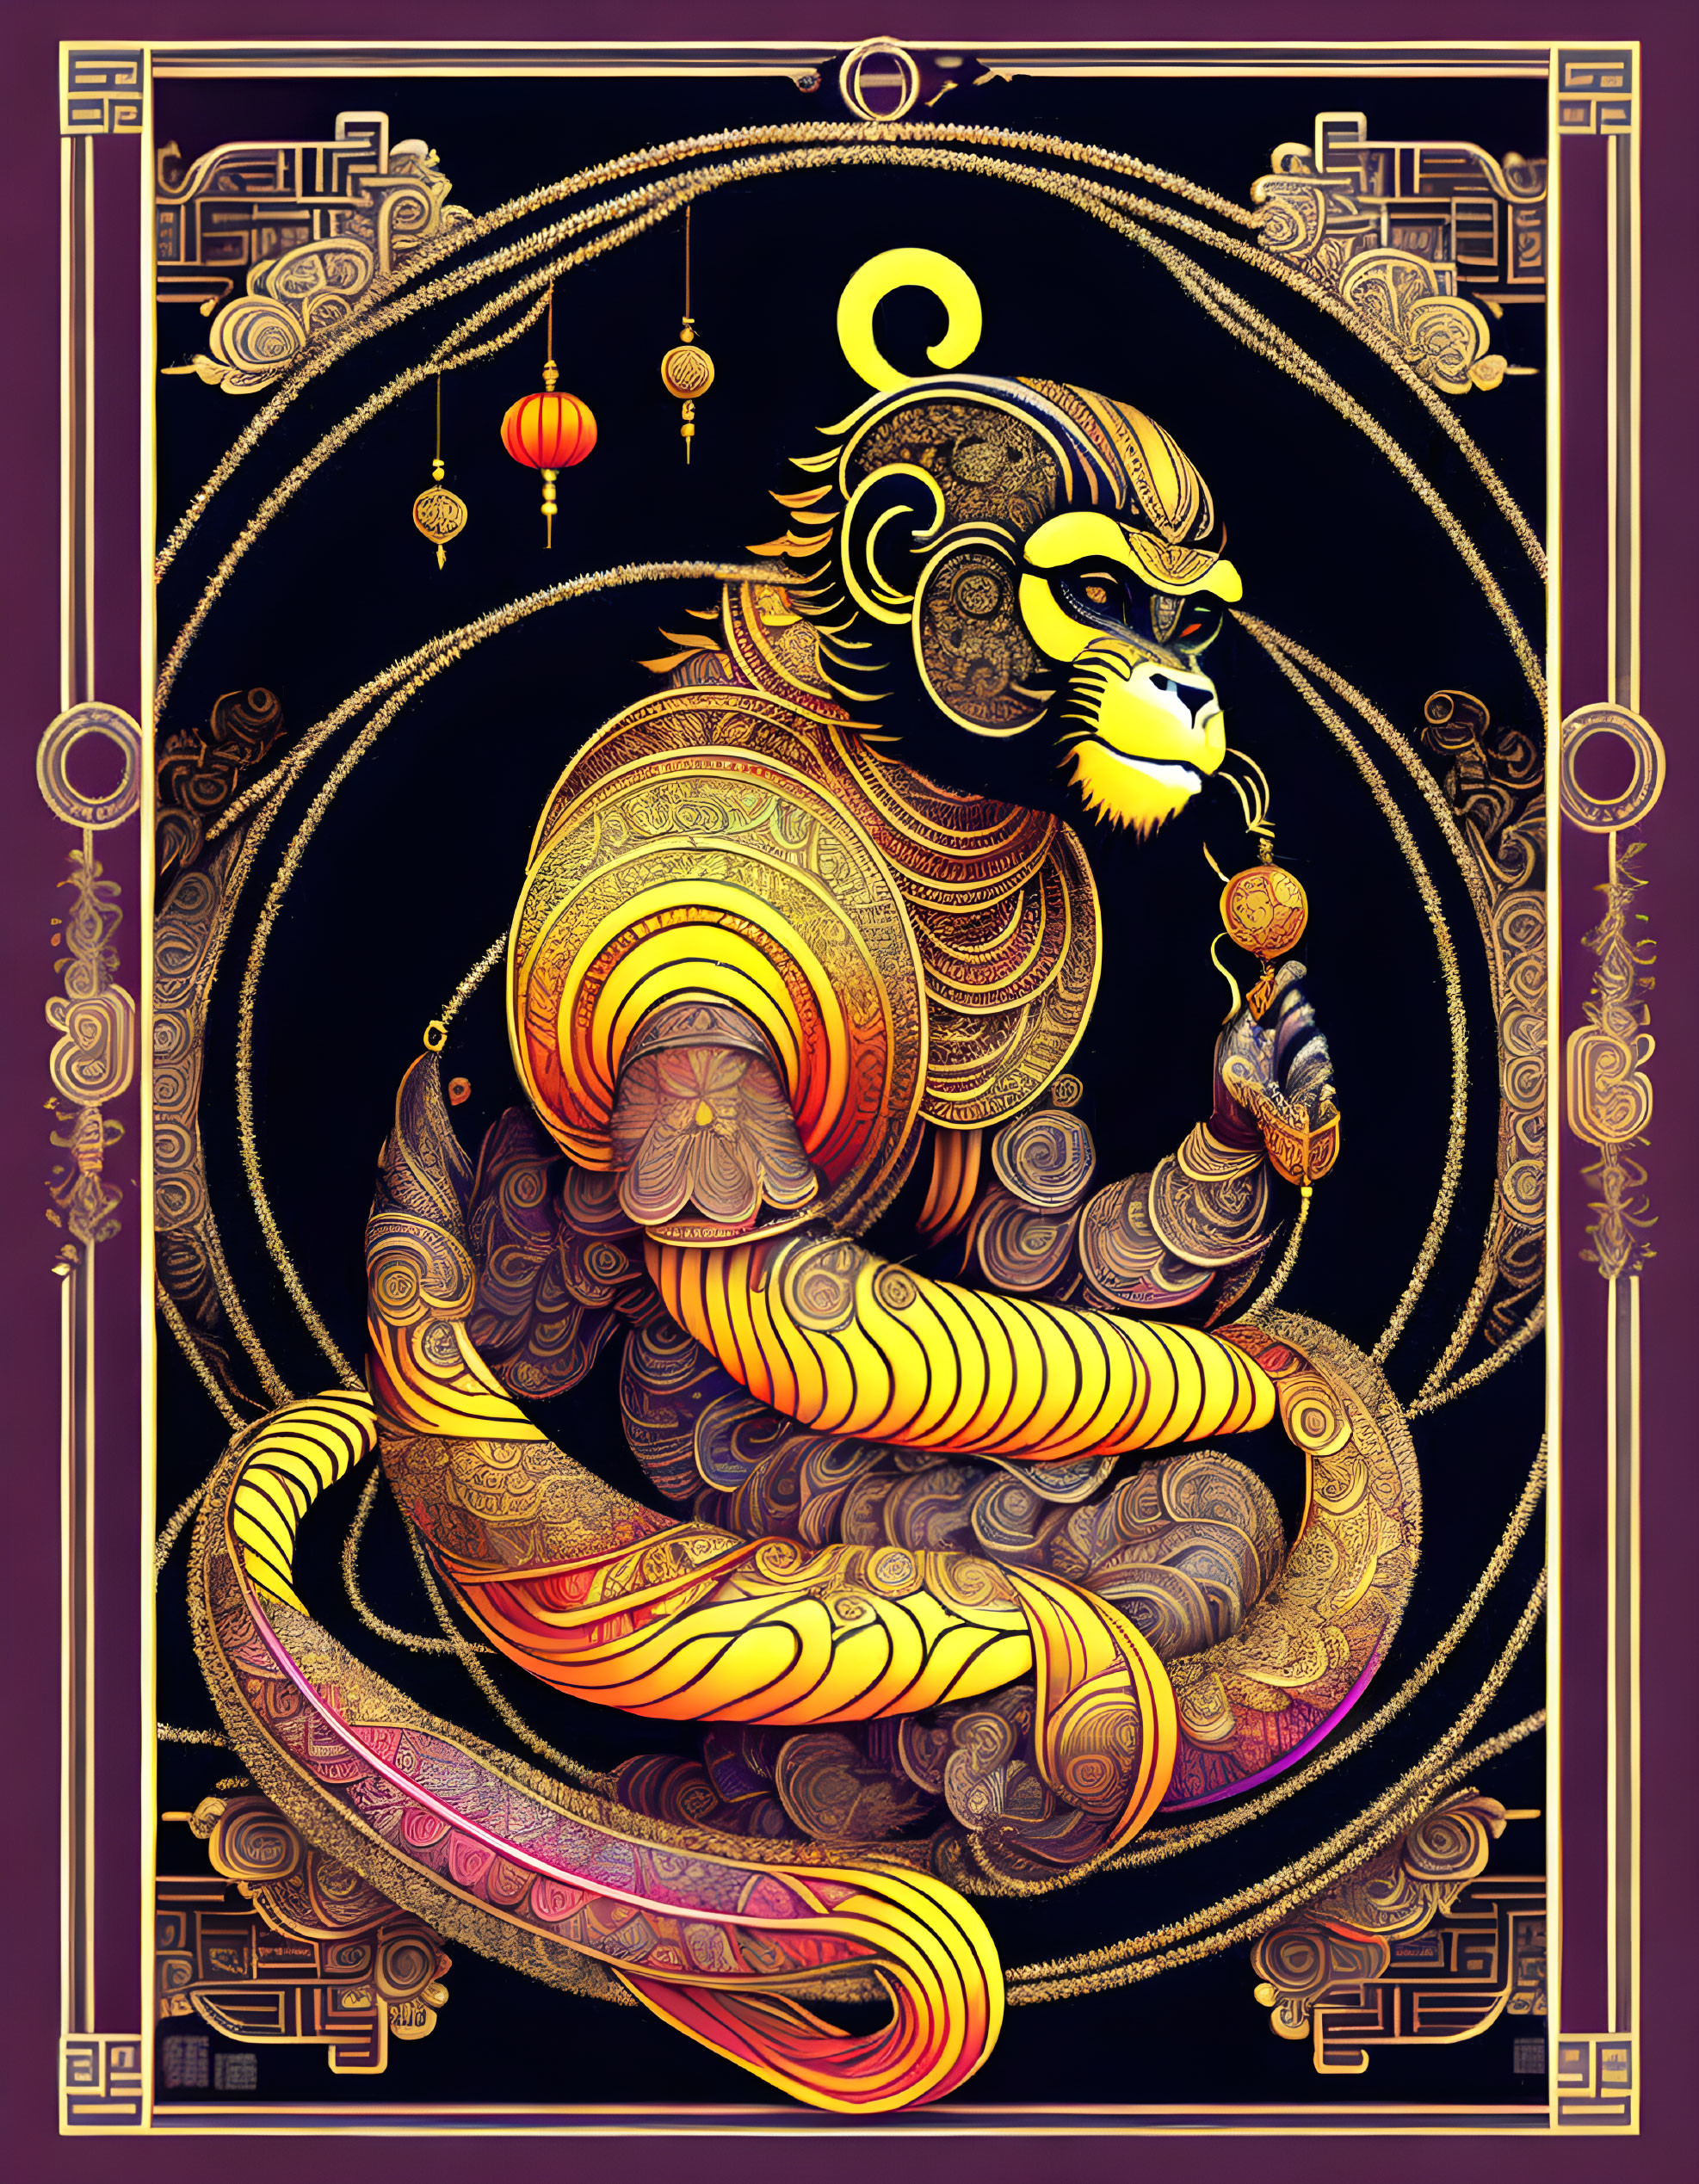 Mythical monkey creature illustration with golden and purple tones and traditional motifs